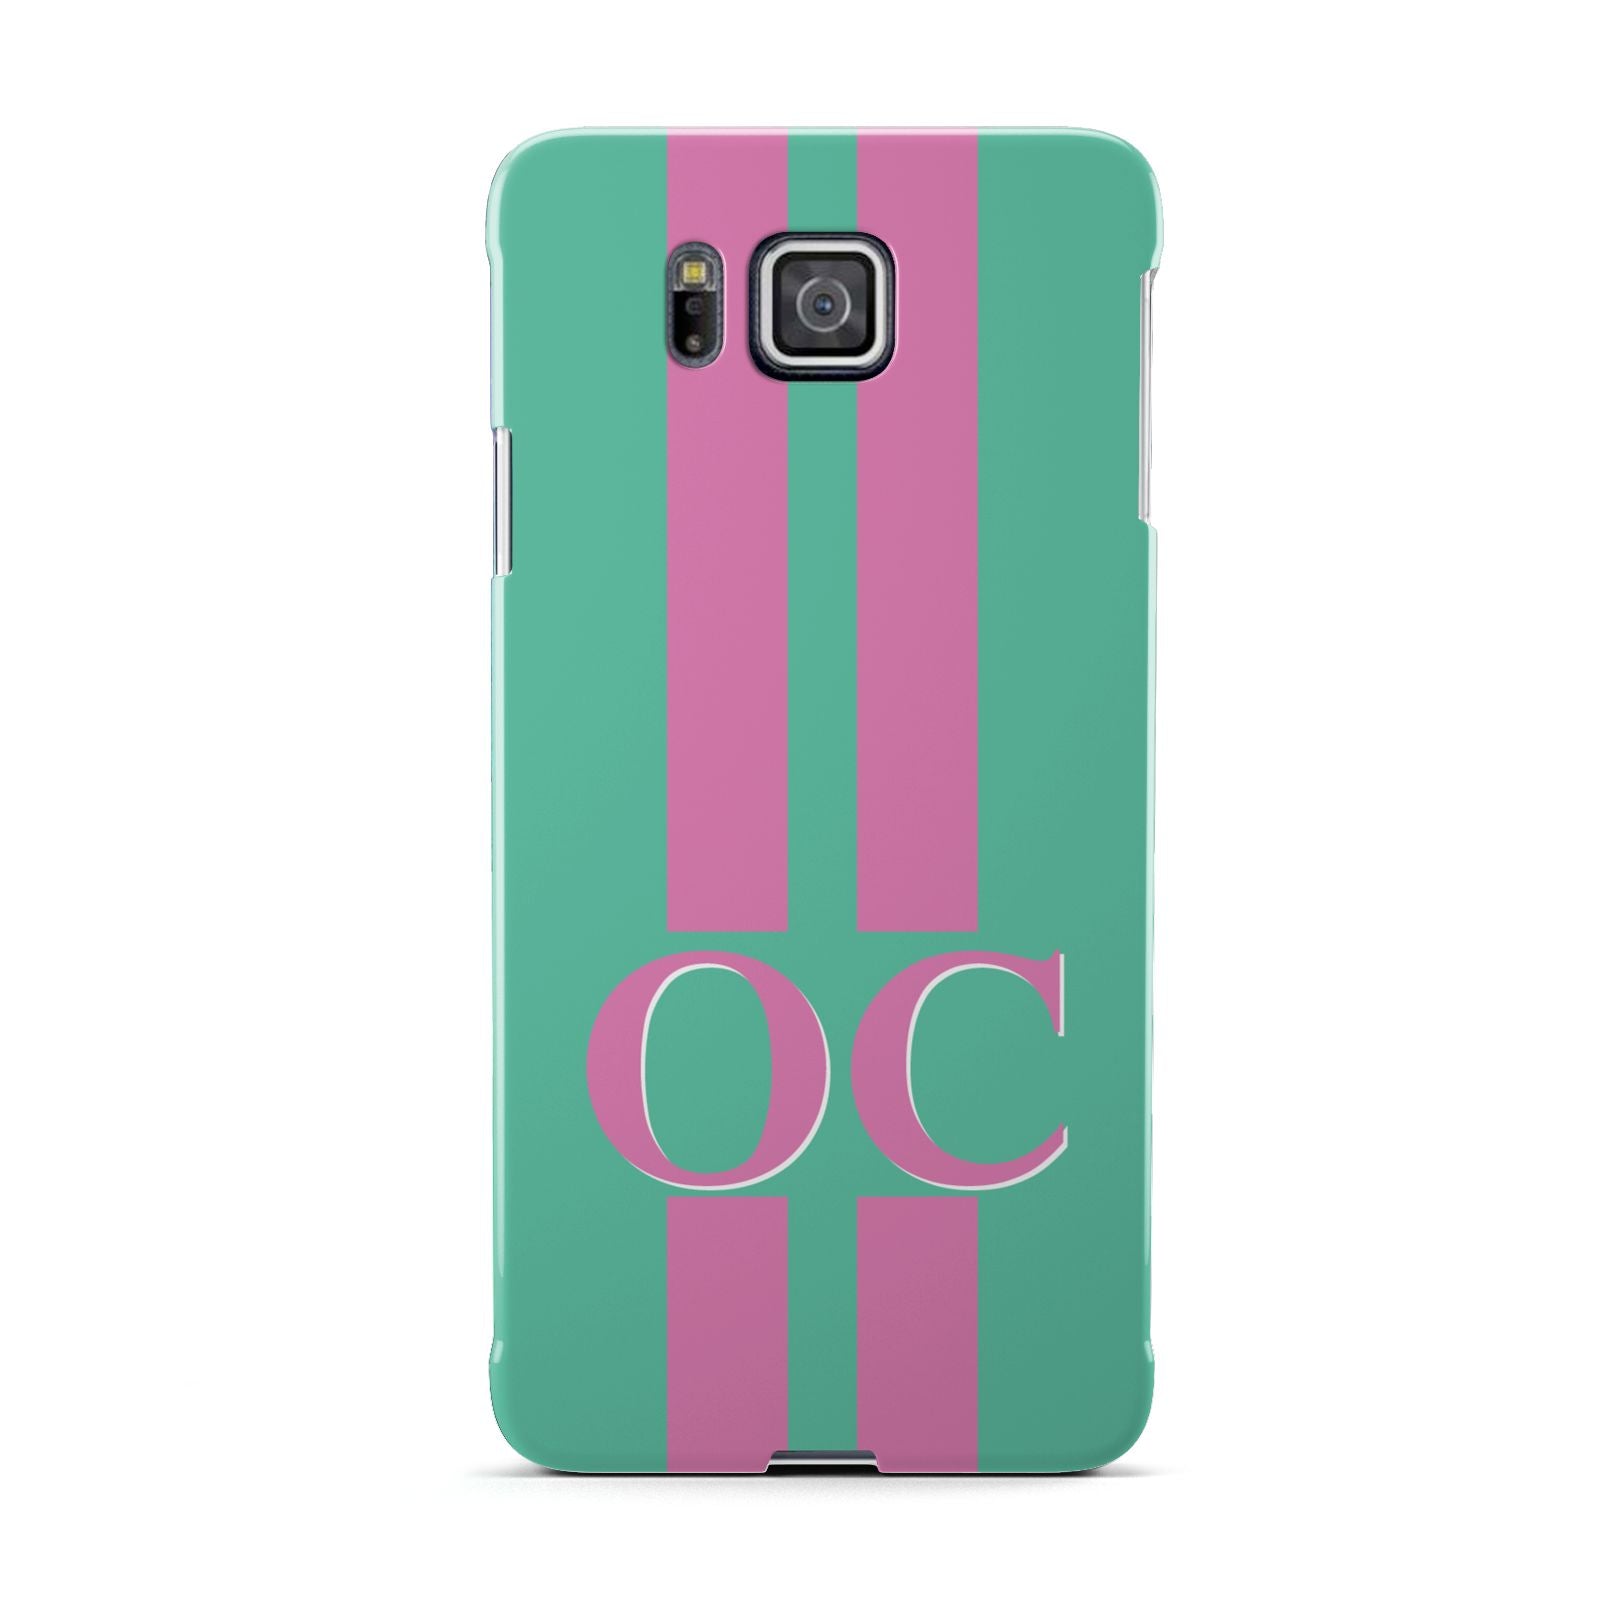 Green Personalised Initials Samsung Galaxy Alpha Case